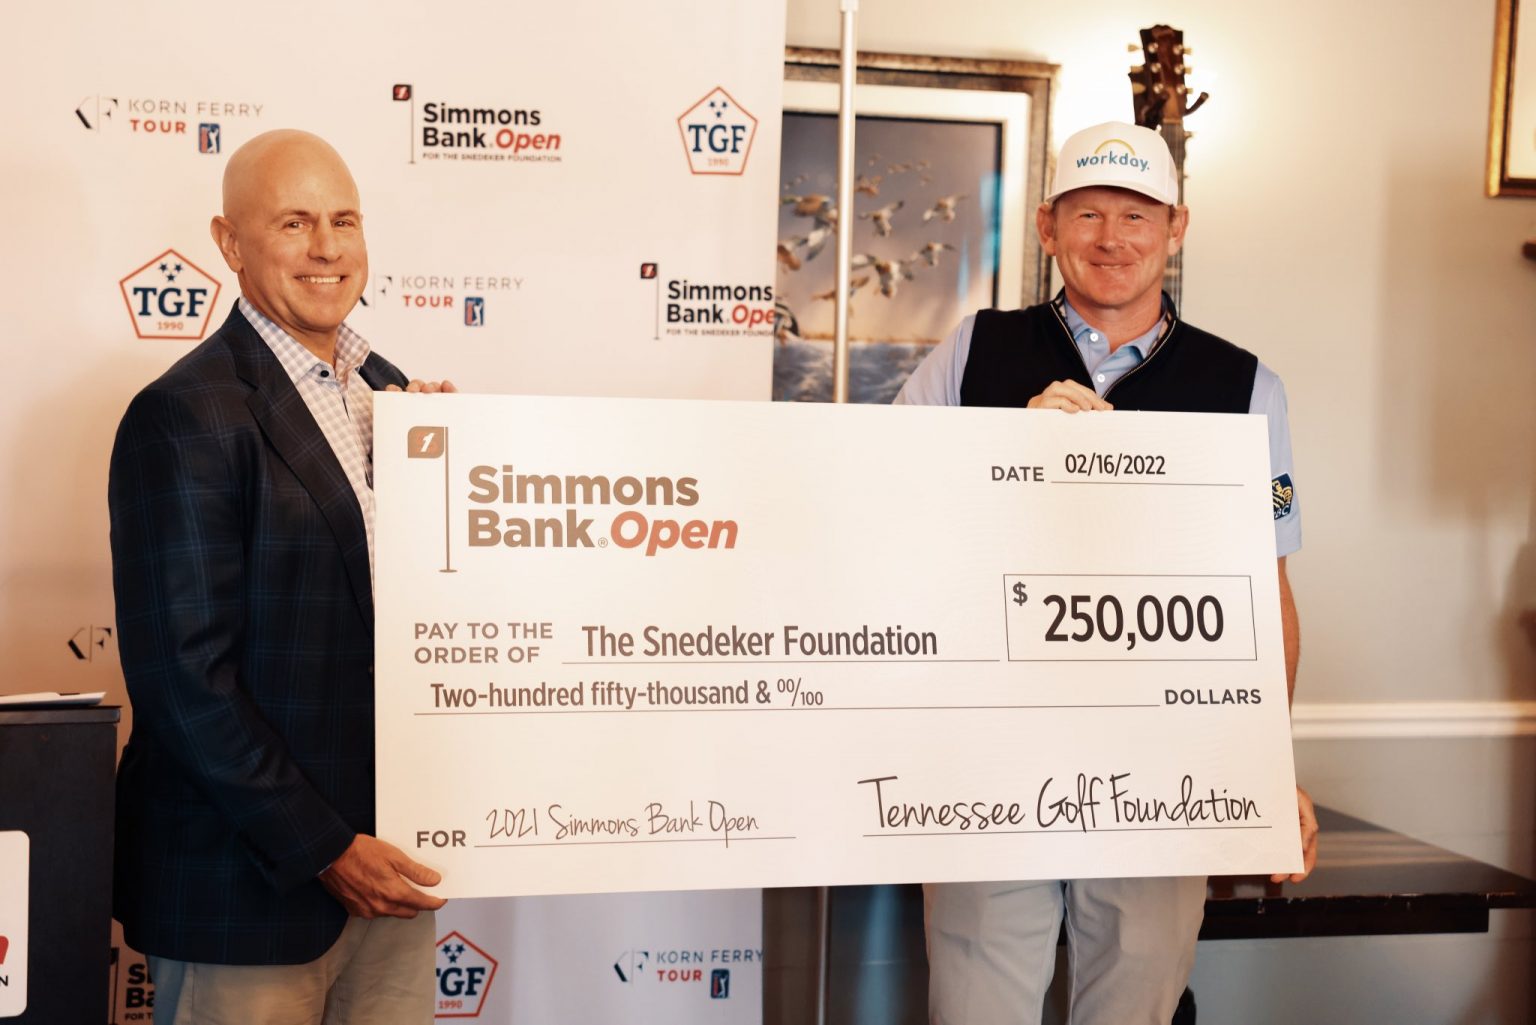 Simmons Bank Open media day held at The Grove to preview 2022